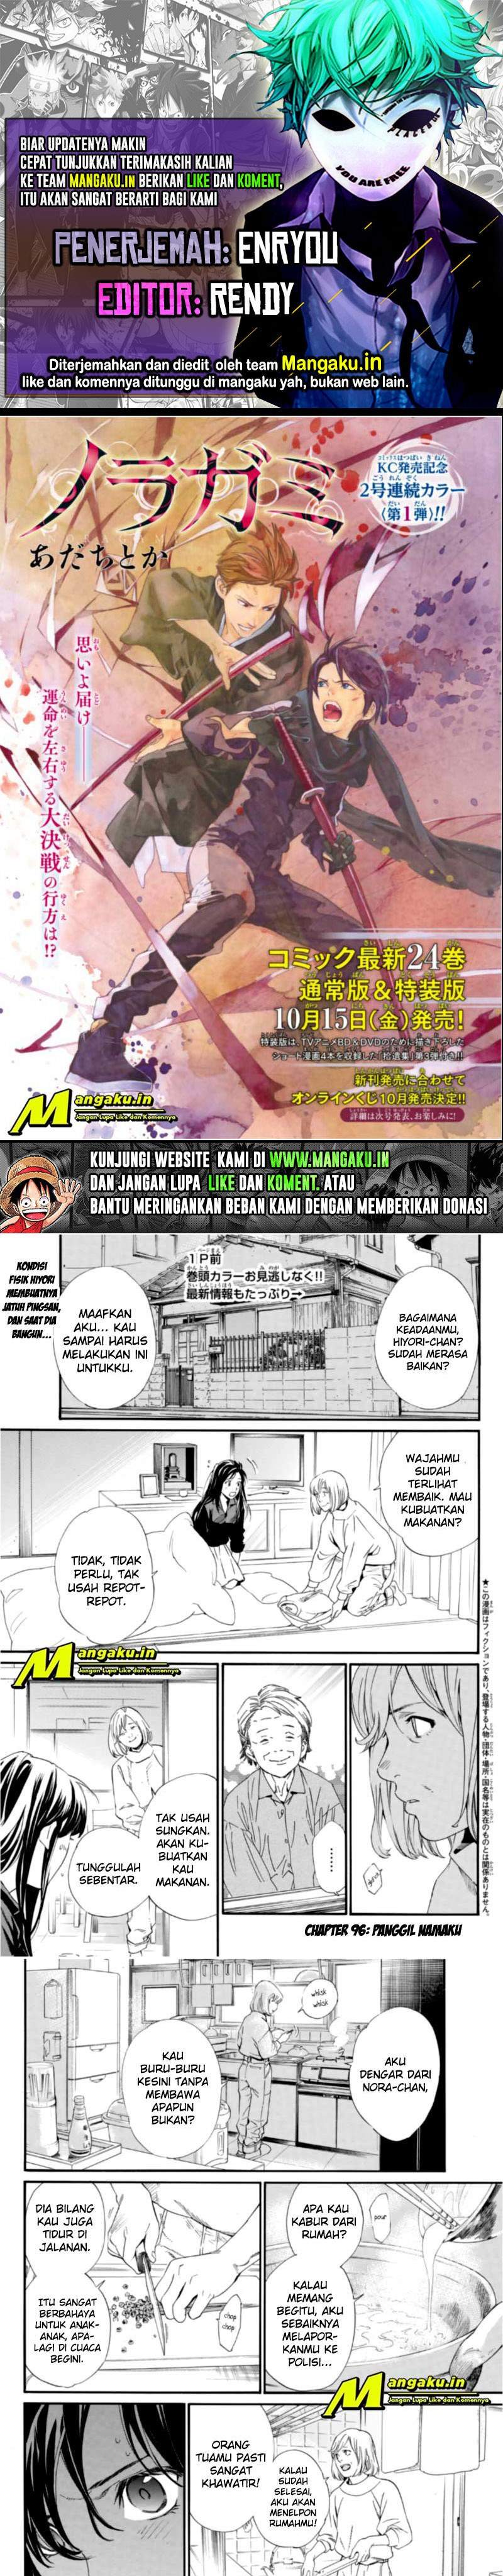 Noragami Chapter 96